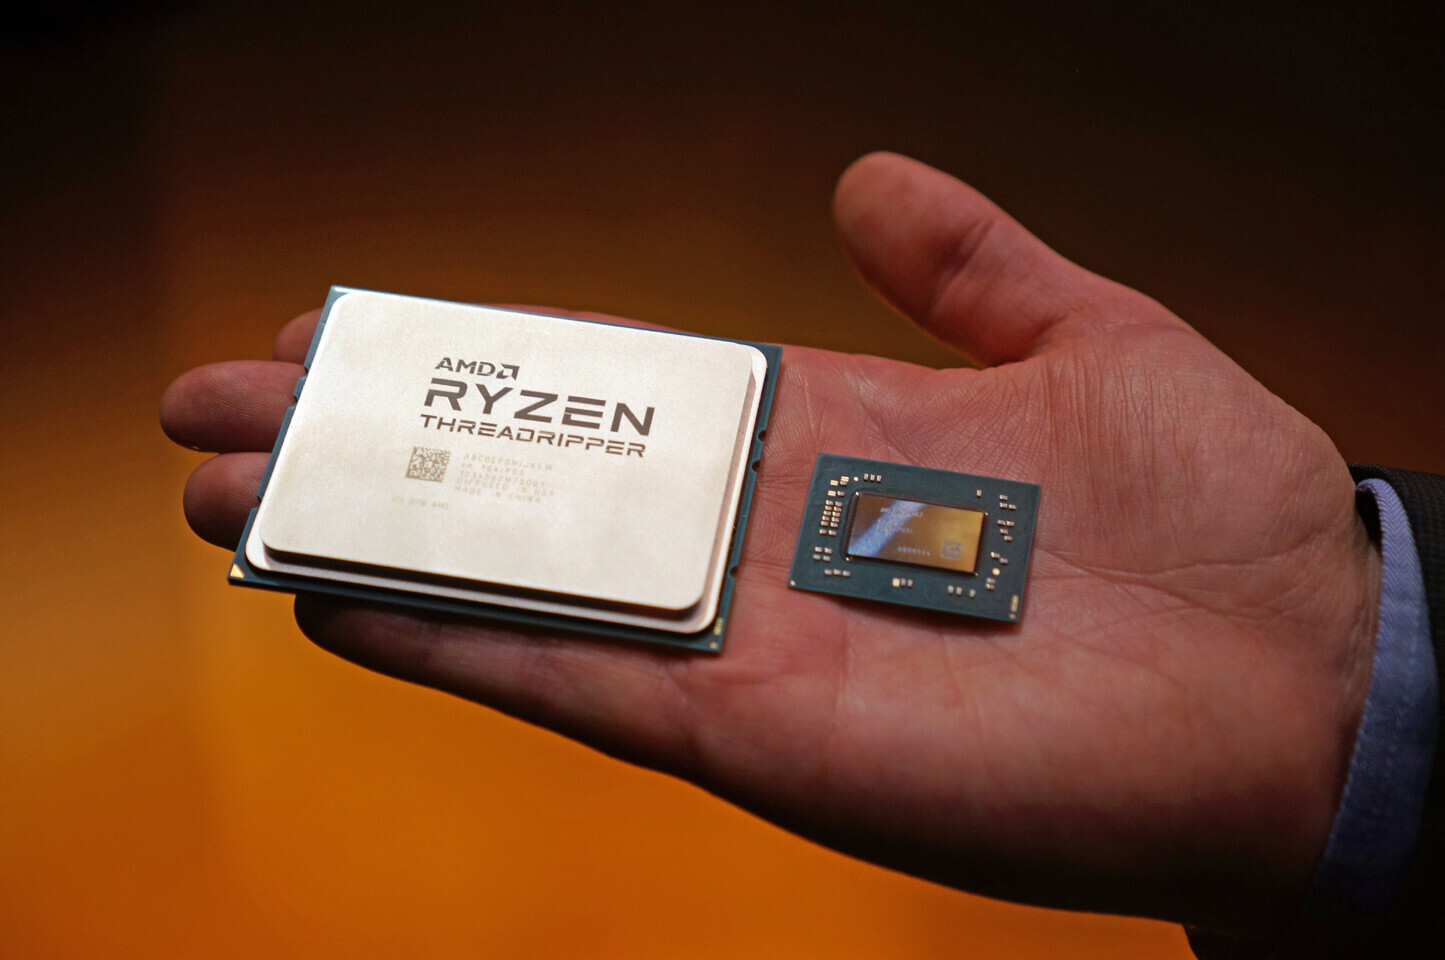 AMD Ryzen Threadripper PRO 7995WX Emerges: 96 Cores, DDR5 Memory, and Over  5.0 GHz Boost Frequency